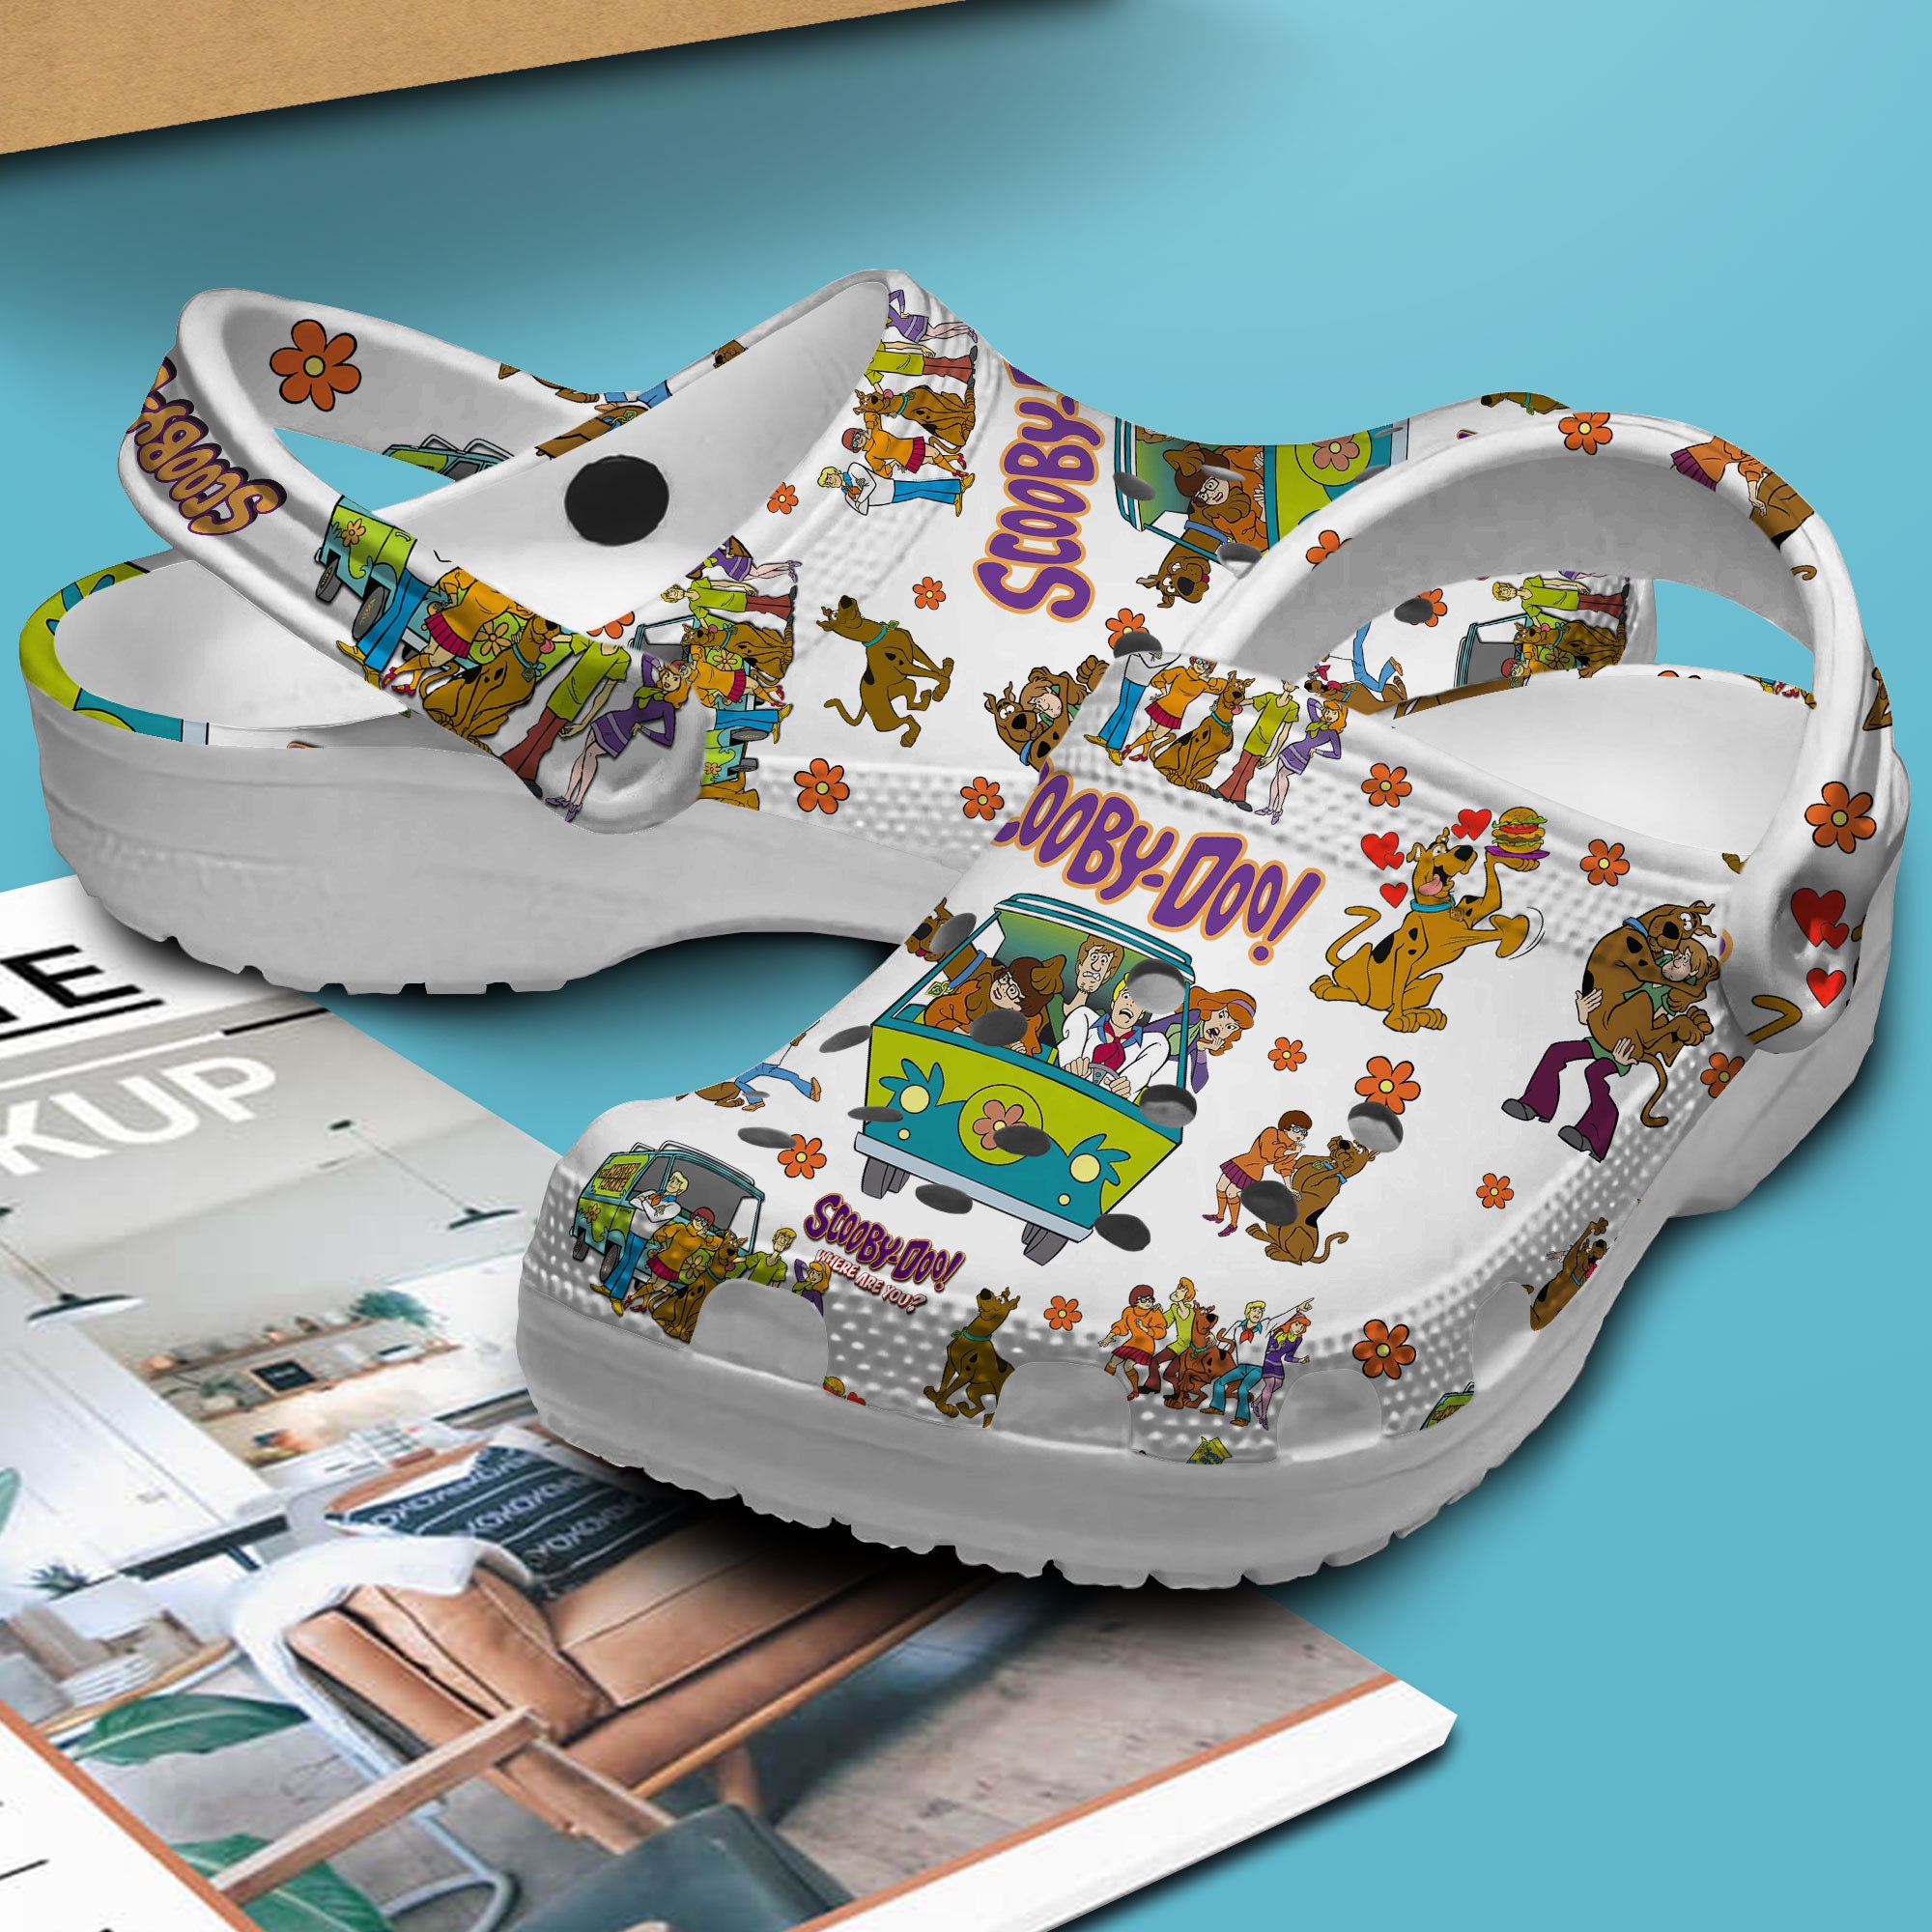 Scooby Doo Christmas Shoes, Scooby Doo Summer Clogs